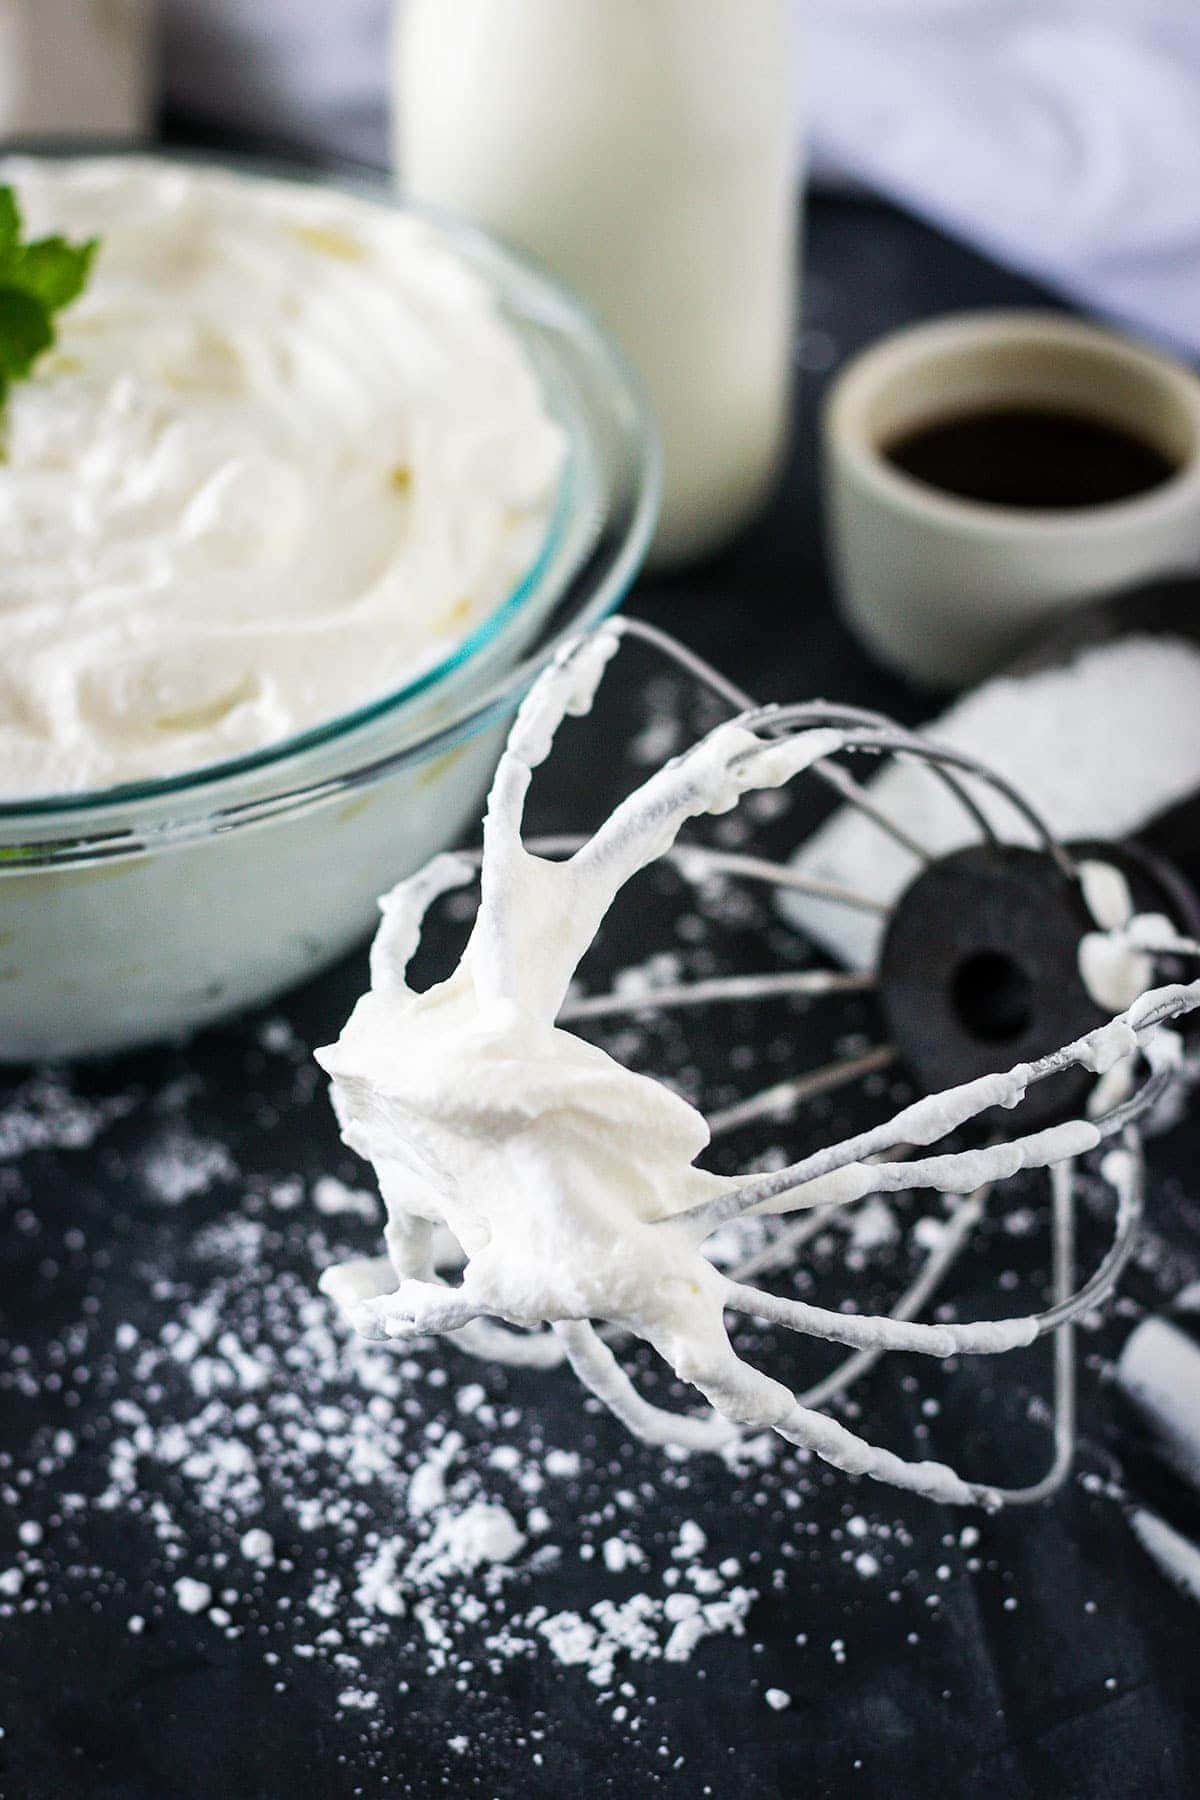 A whisk with whipped cream laying on black table scatter with sugar and a bowl of whipped cream in the background.